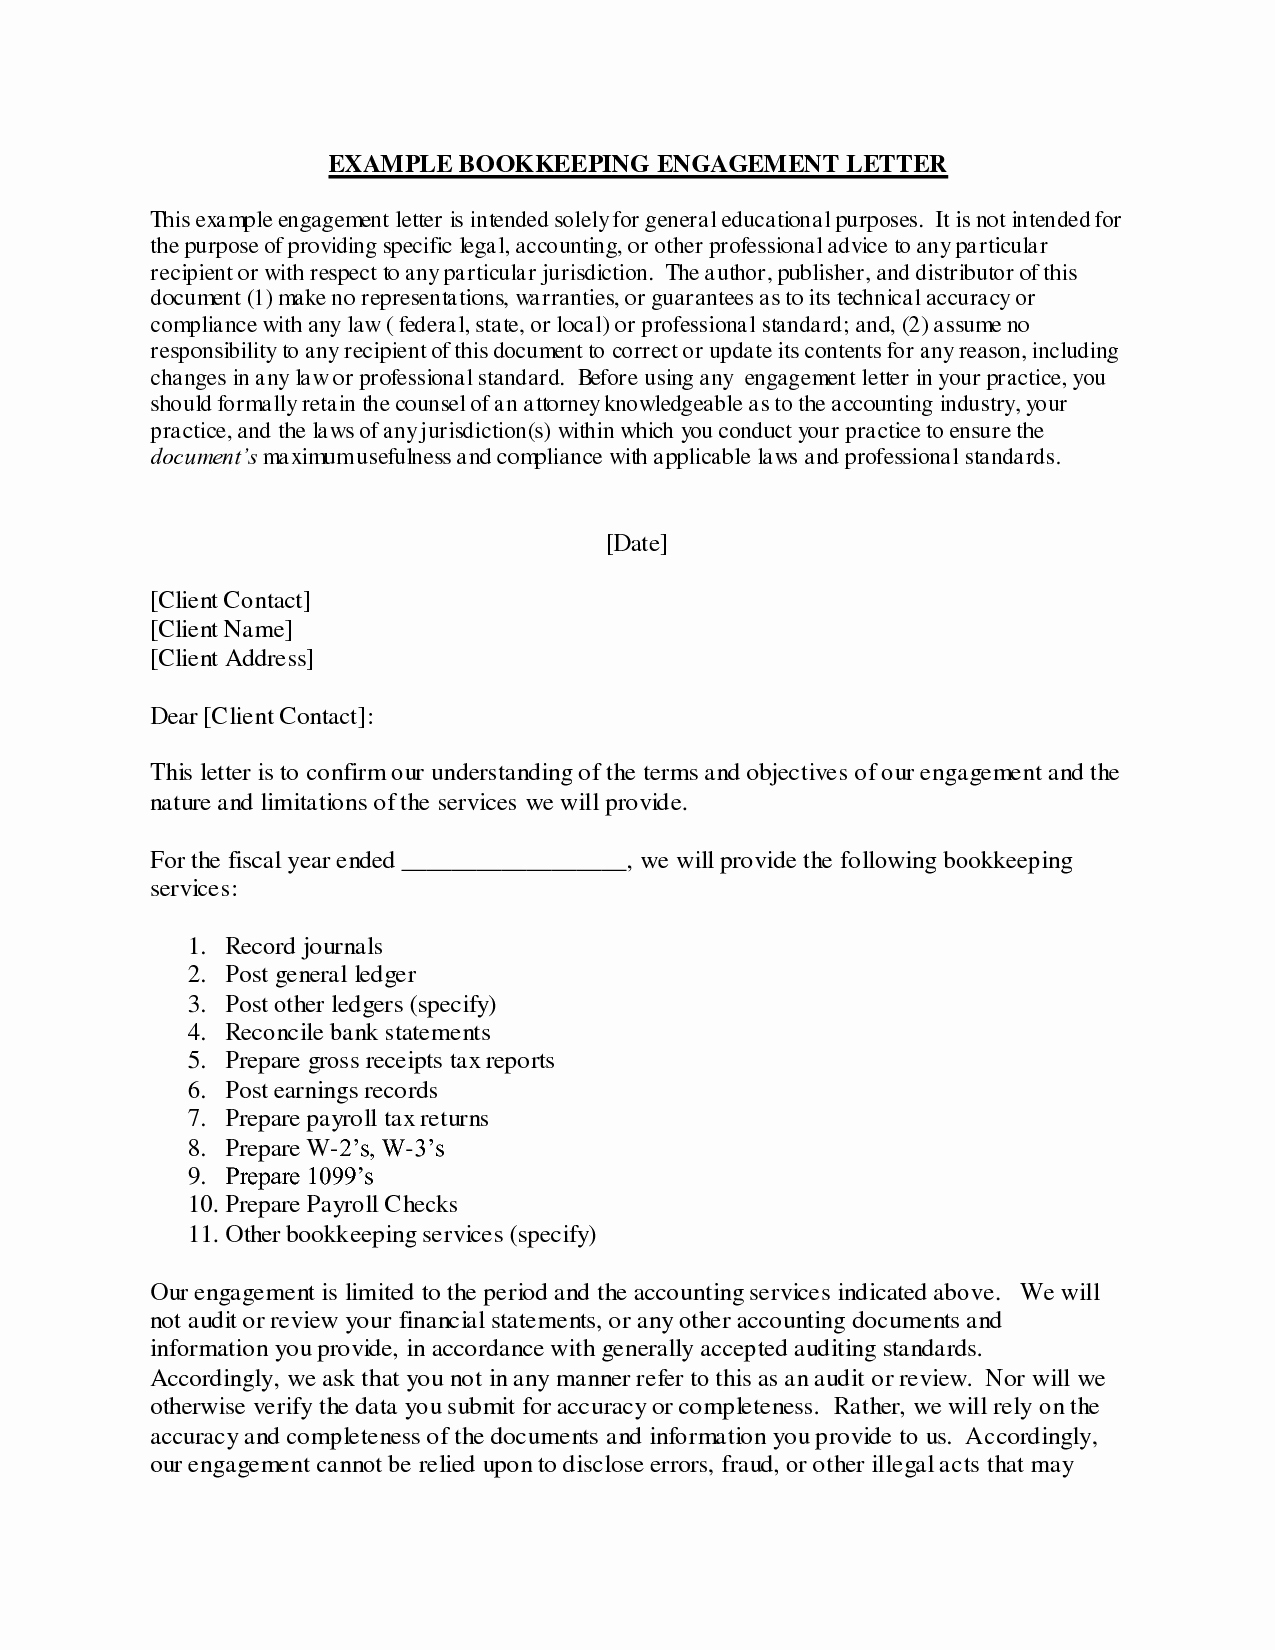 Cpa Engagement Letter Template - 18 Sample Consulting Engagement Letters